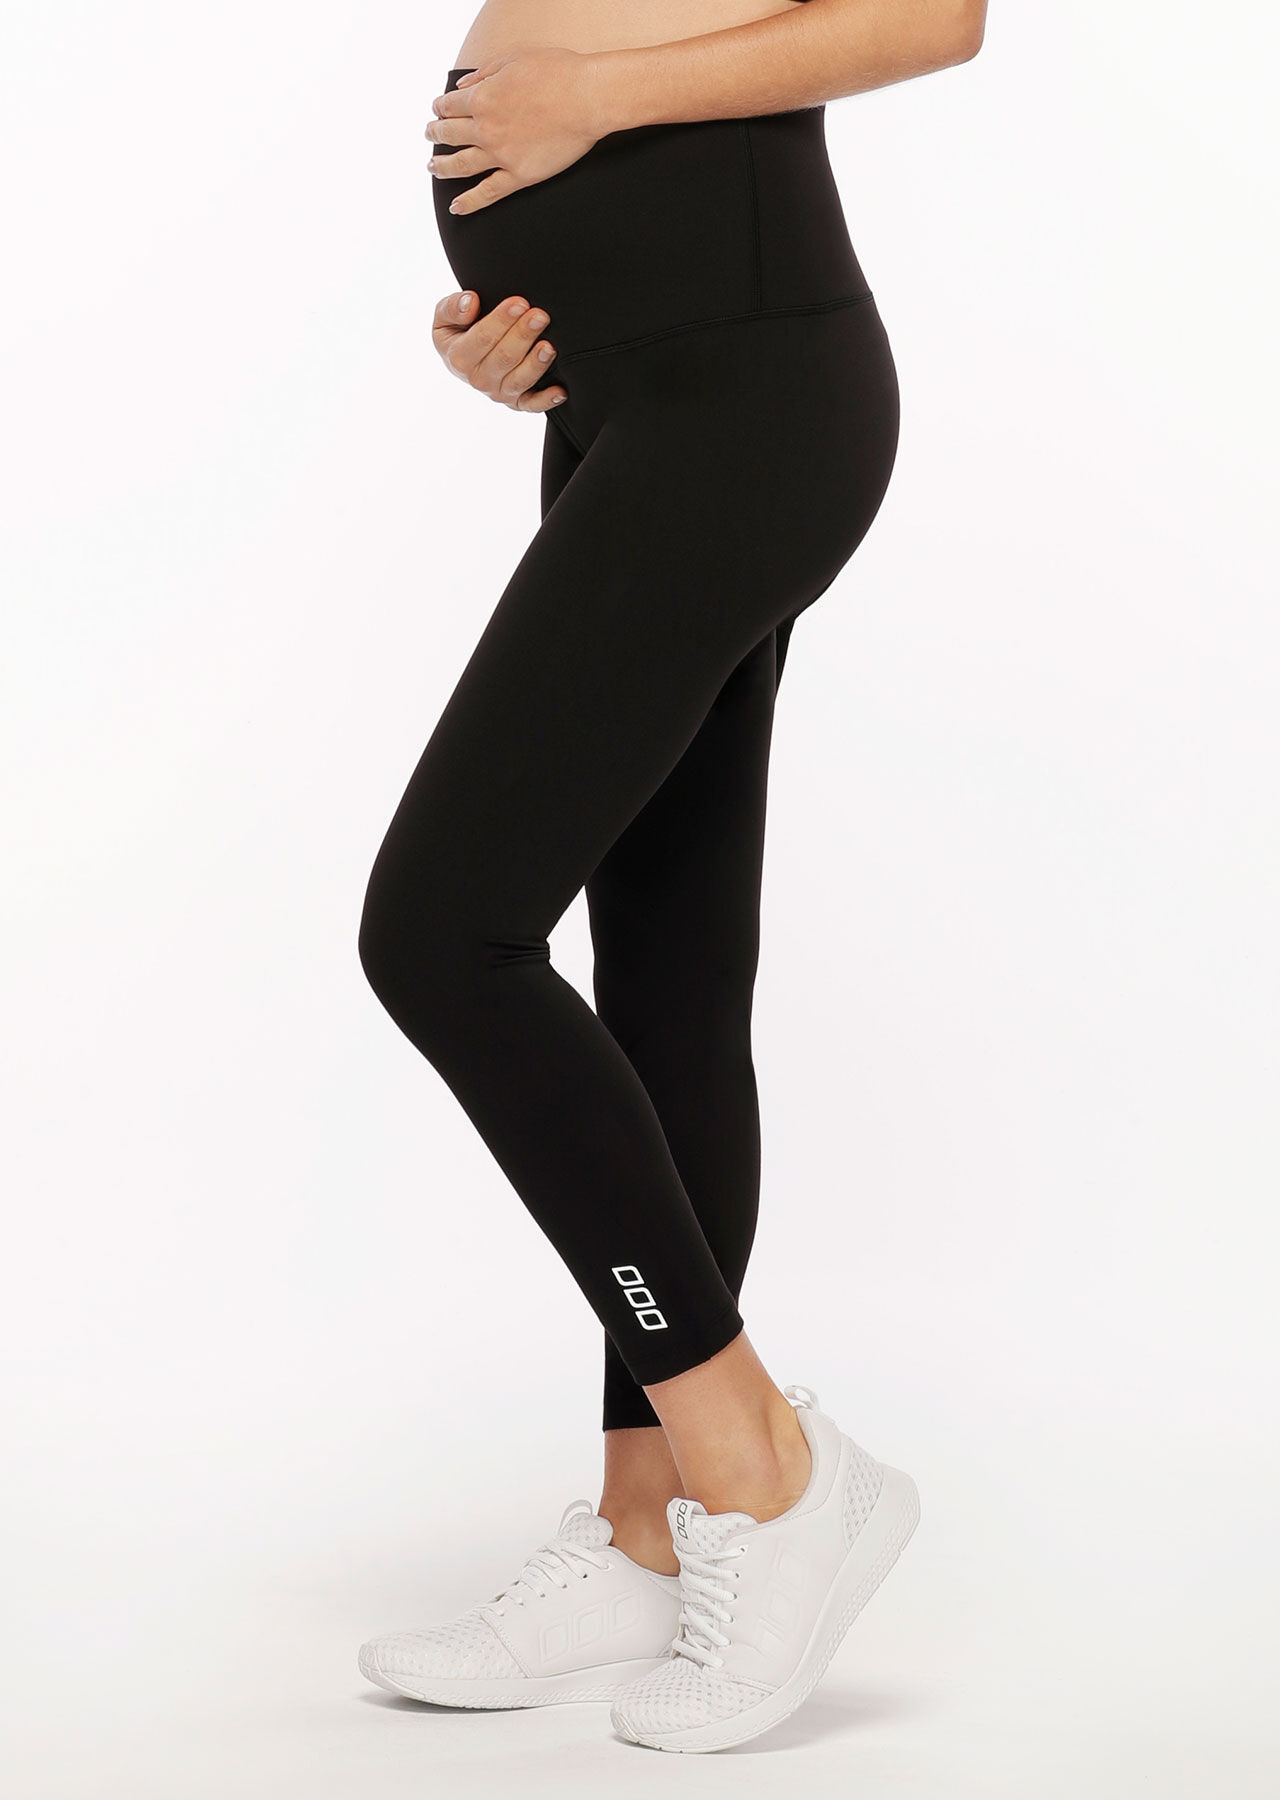 17 Best Maternity Workout Clothes | The Strategist